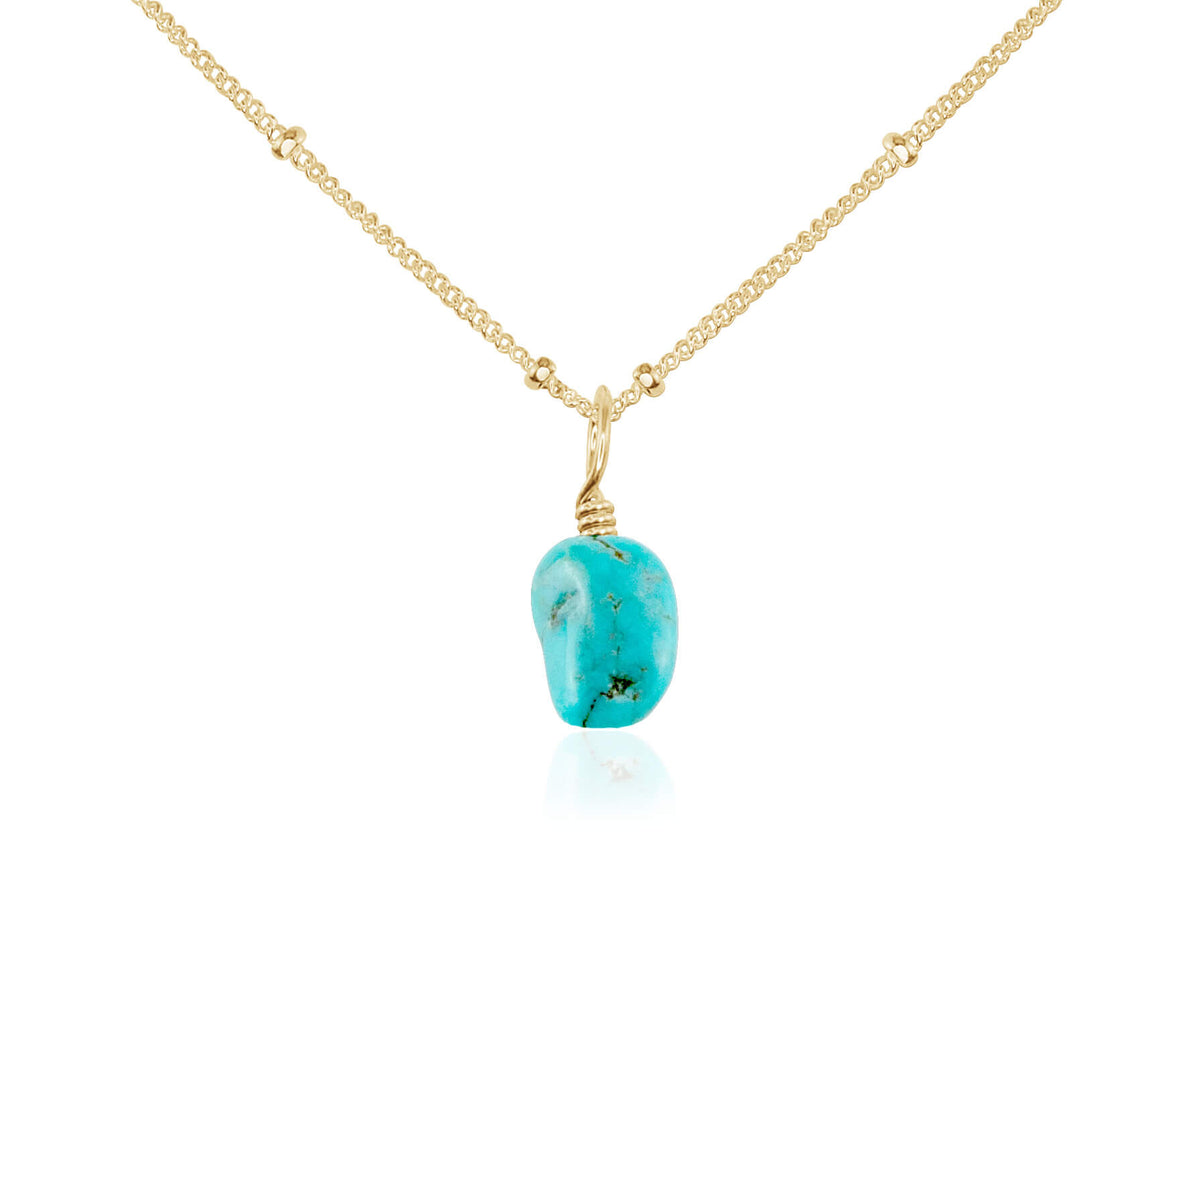 Raw Crystal Pendant Necklace - Turquoise - 14K Gold Fill Satellite - Luna Tide Handmade Jewellery